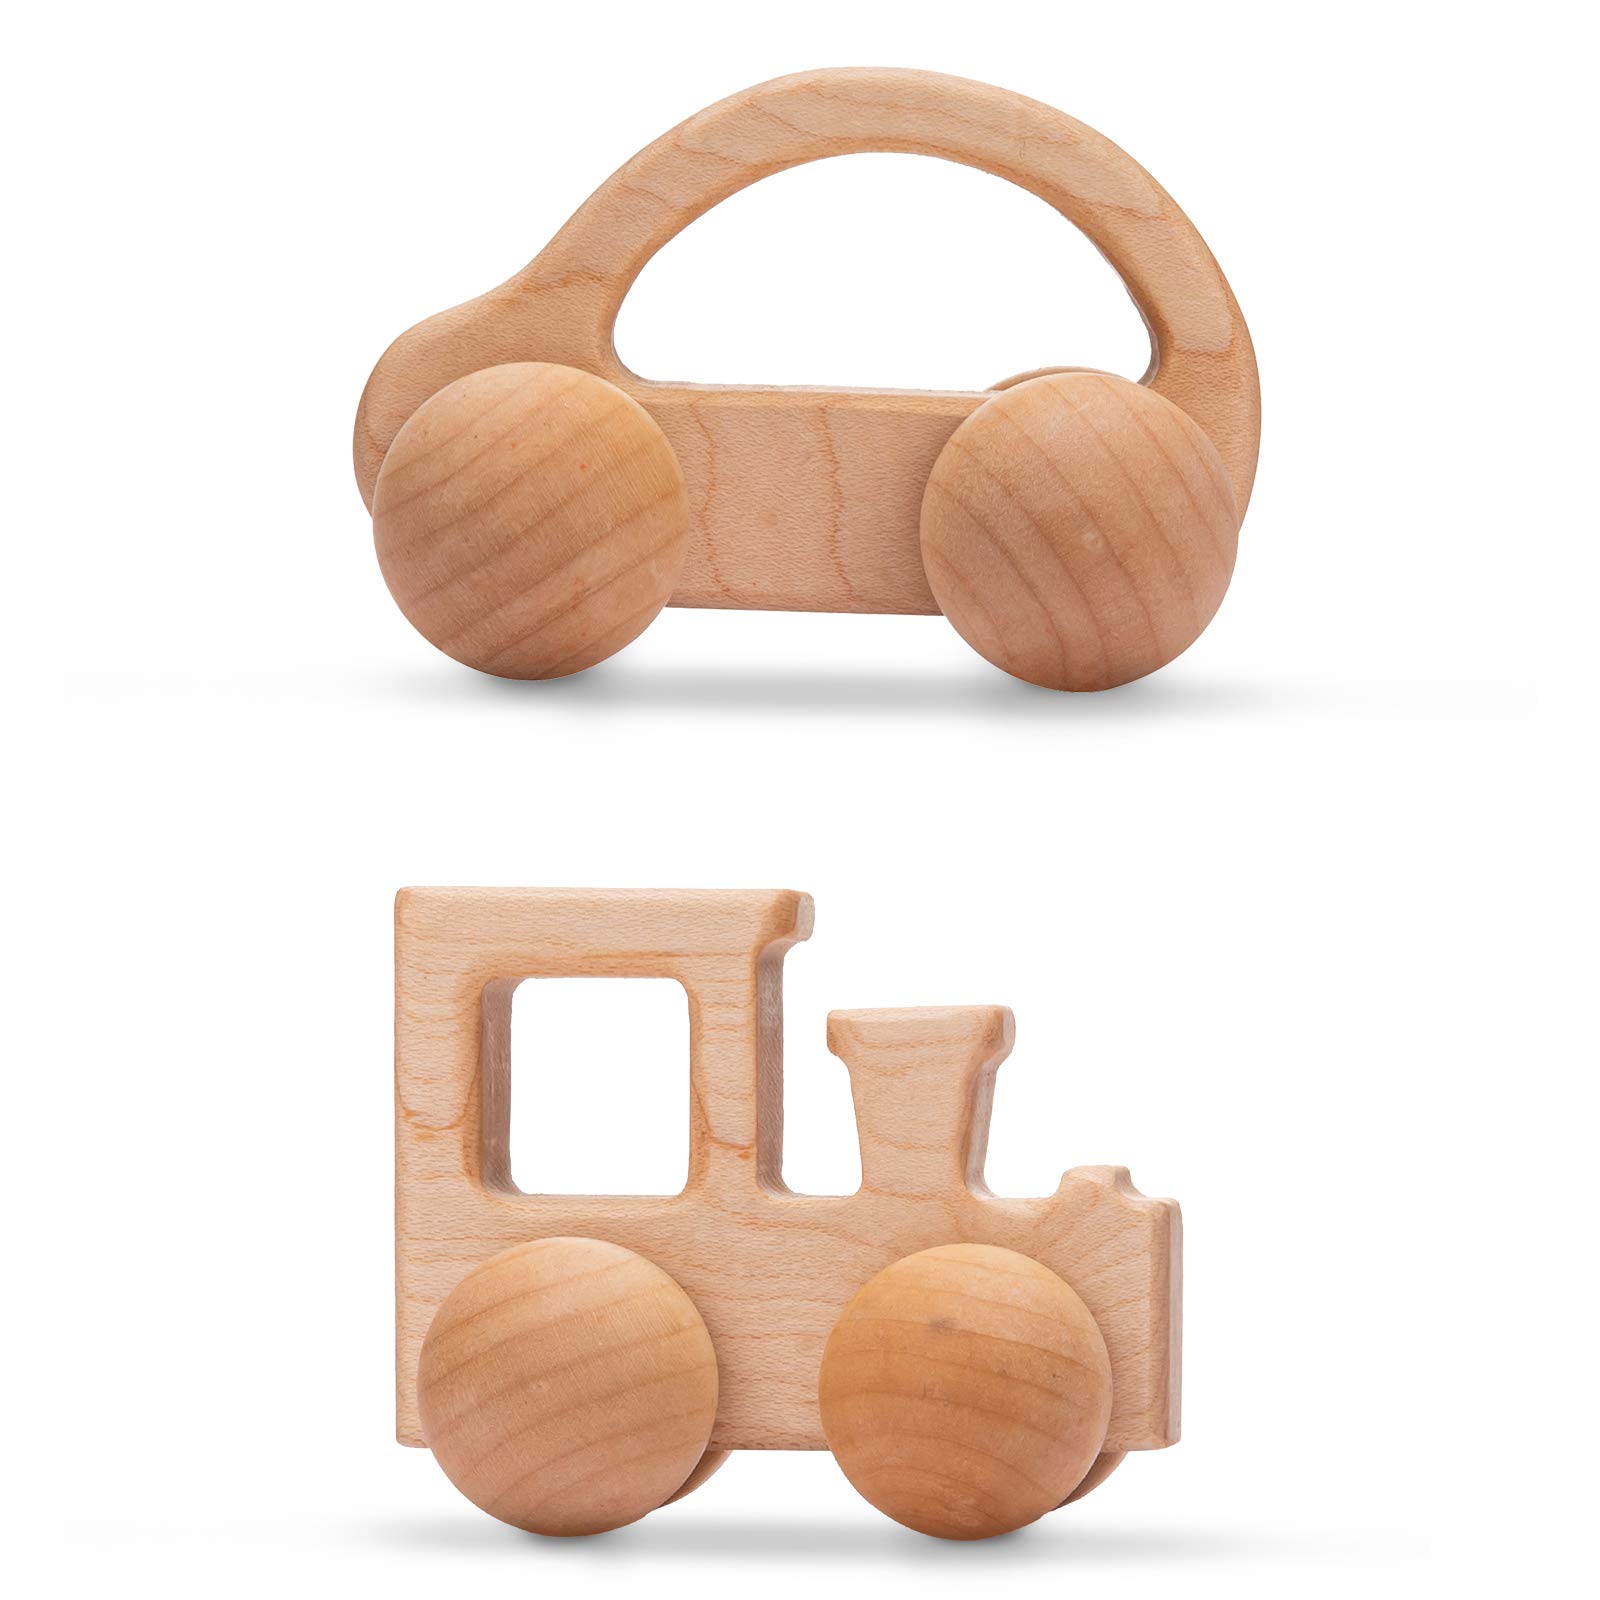 Organic Wooden Rattle toy